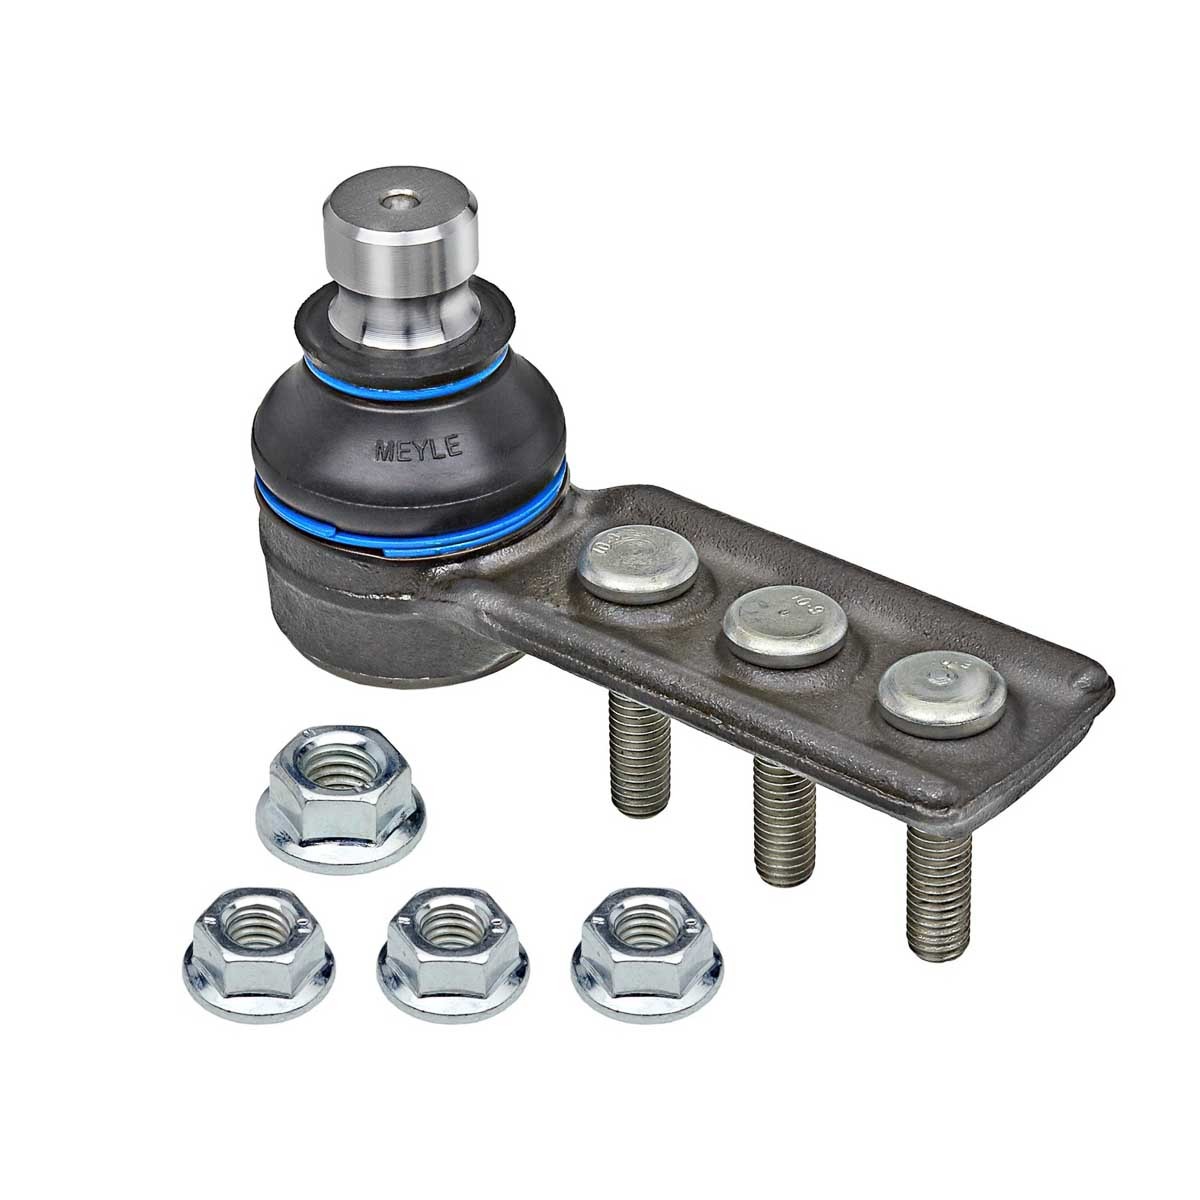 MBJ0262 MEYLE Lower, Front Axle Left, Front Axle Right, with accessories, ORIGINAL Quality, 19mm, 38mm Cone Size: 19mm Suspension ball joint 516 010 5554 buy